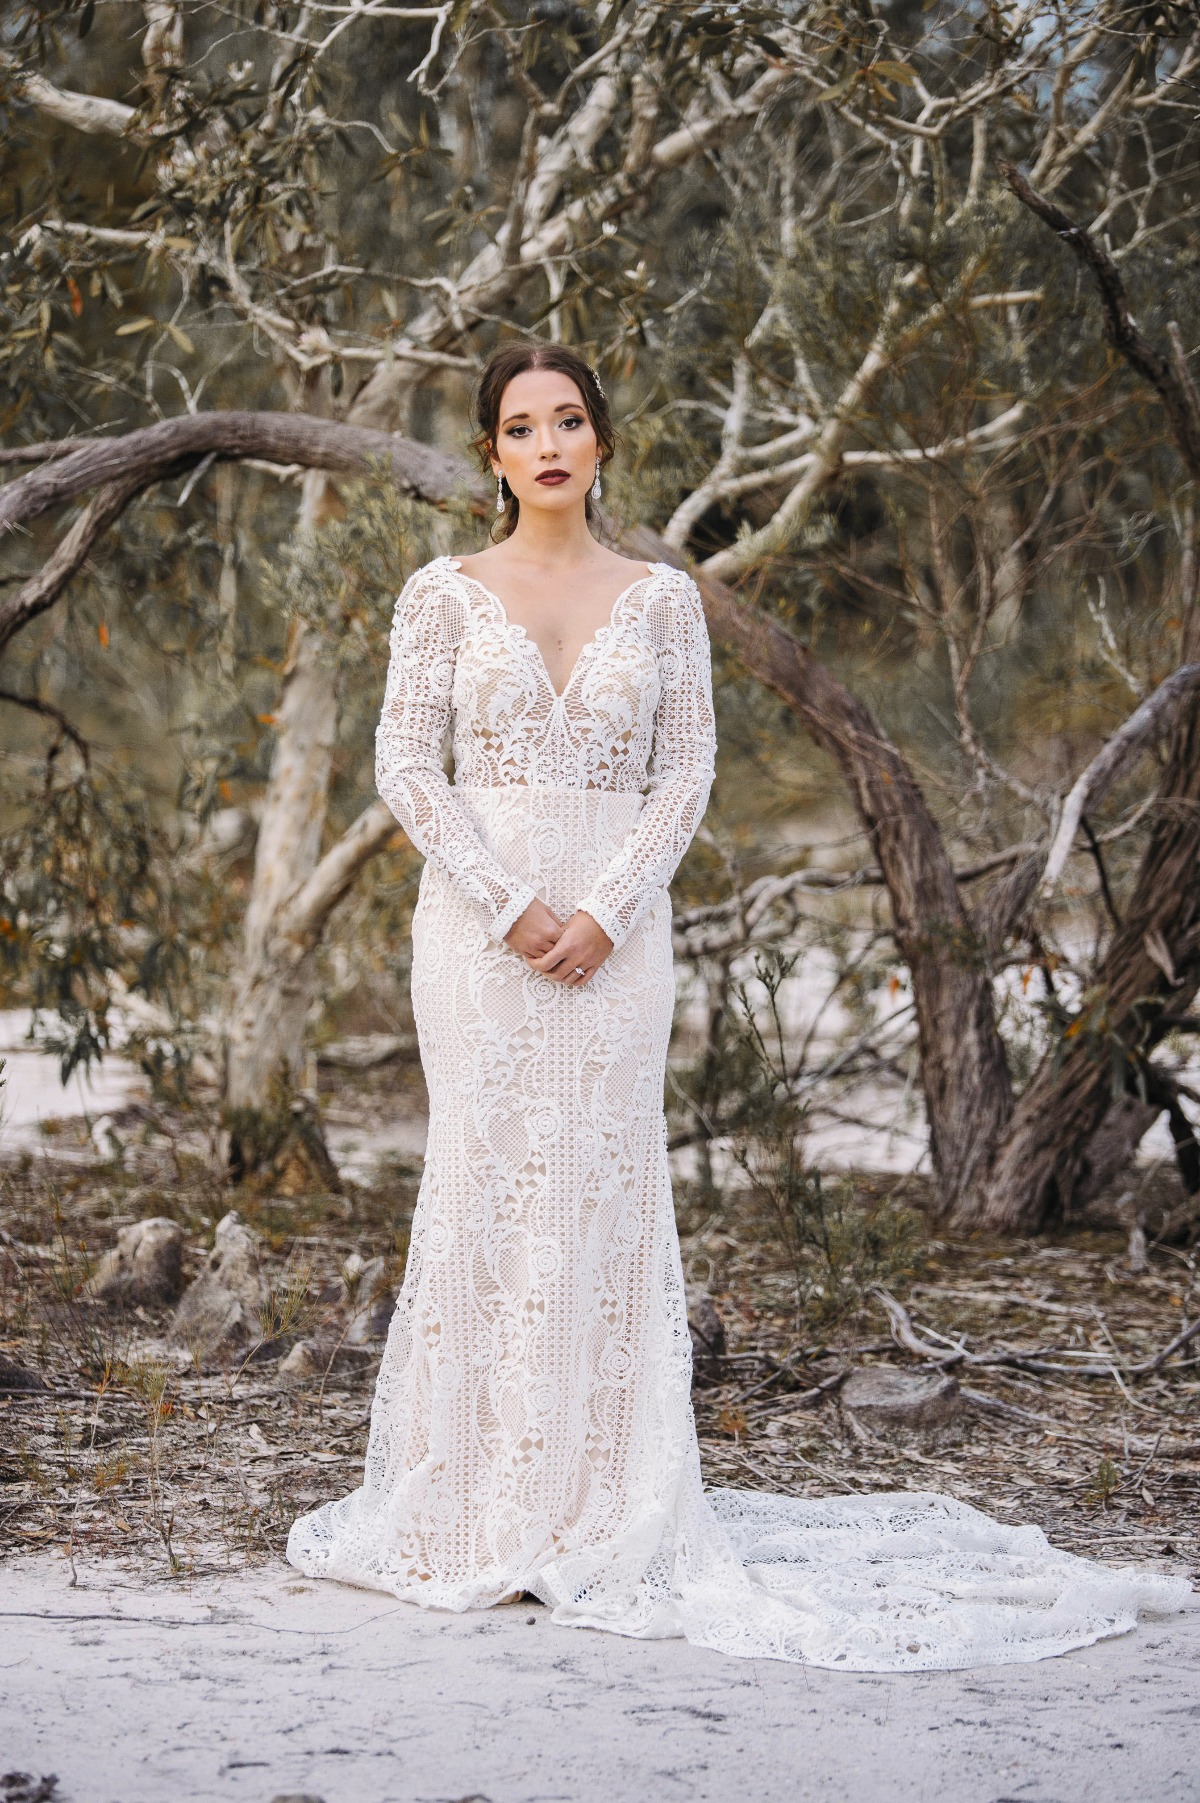 Delilah gown from Goddess by Nature